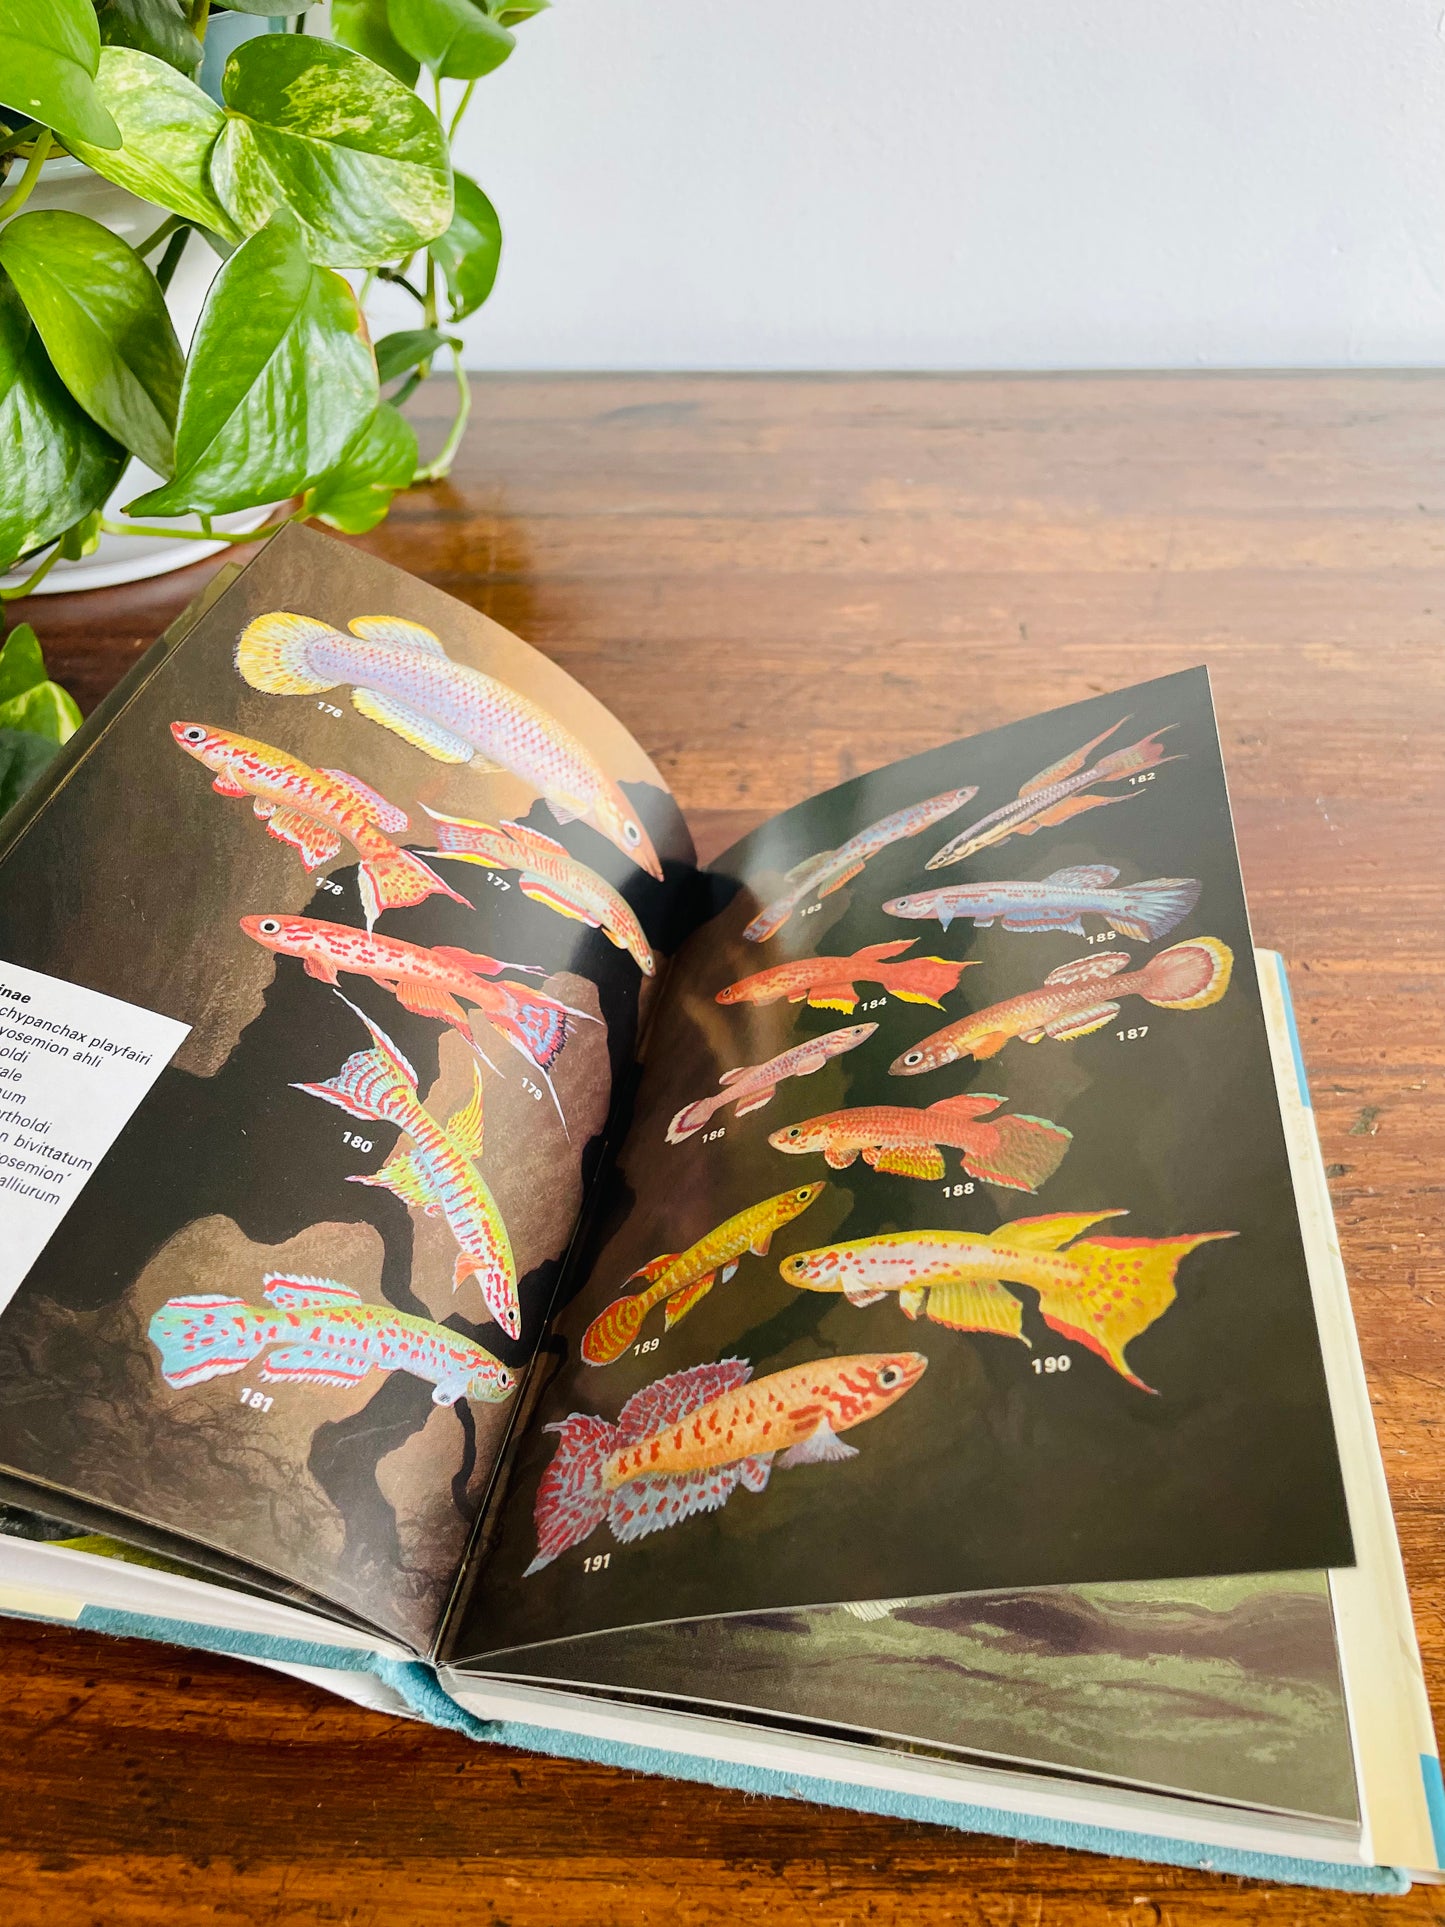 Macmillan Color Series - Aquarium Fishes in Color Hardcover Book by J. M. Madsen (1975)